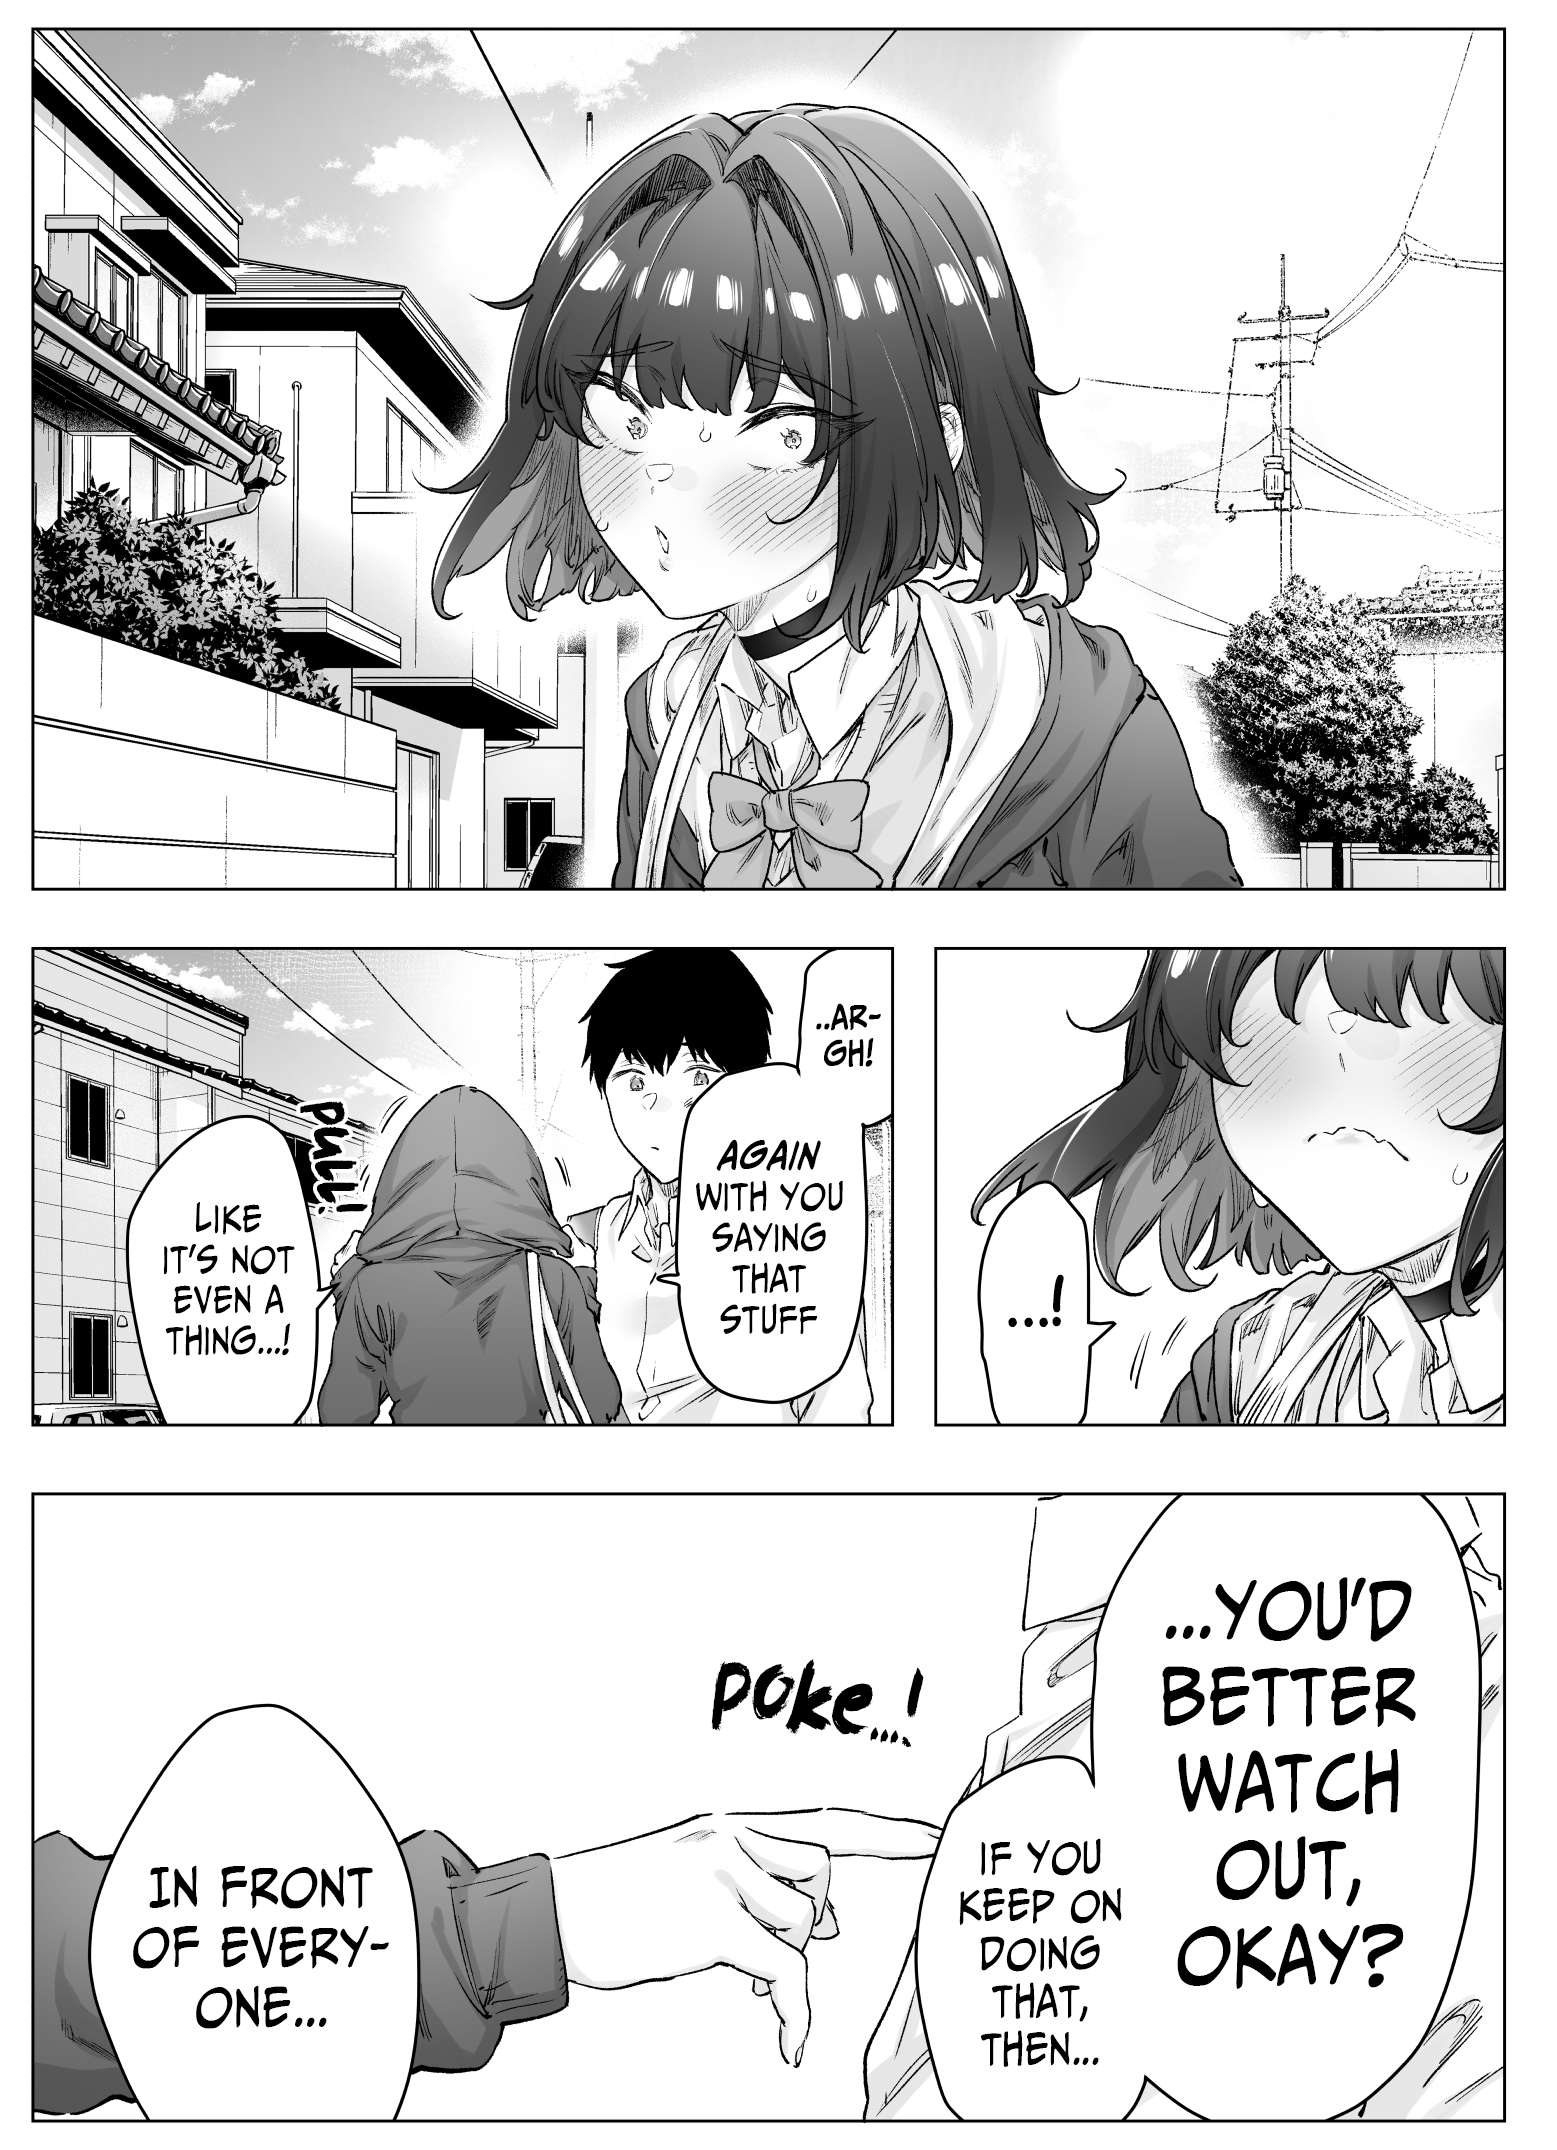 The Tsuntsuntsuntsuntsuntsun Tsuntsuntsuntsuntsundere Girl Getting Less And Less Tsun Day By Day - chapter 101 - #2